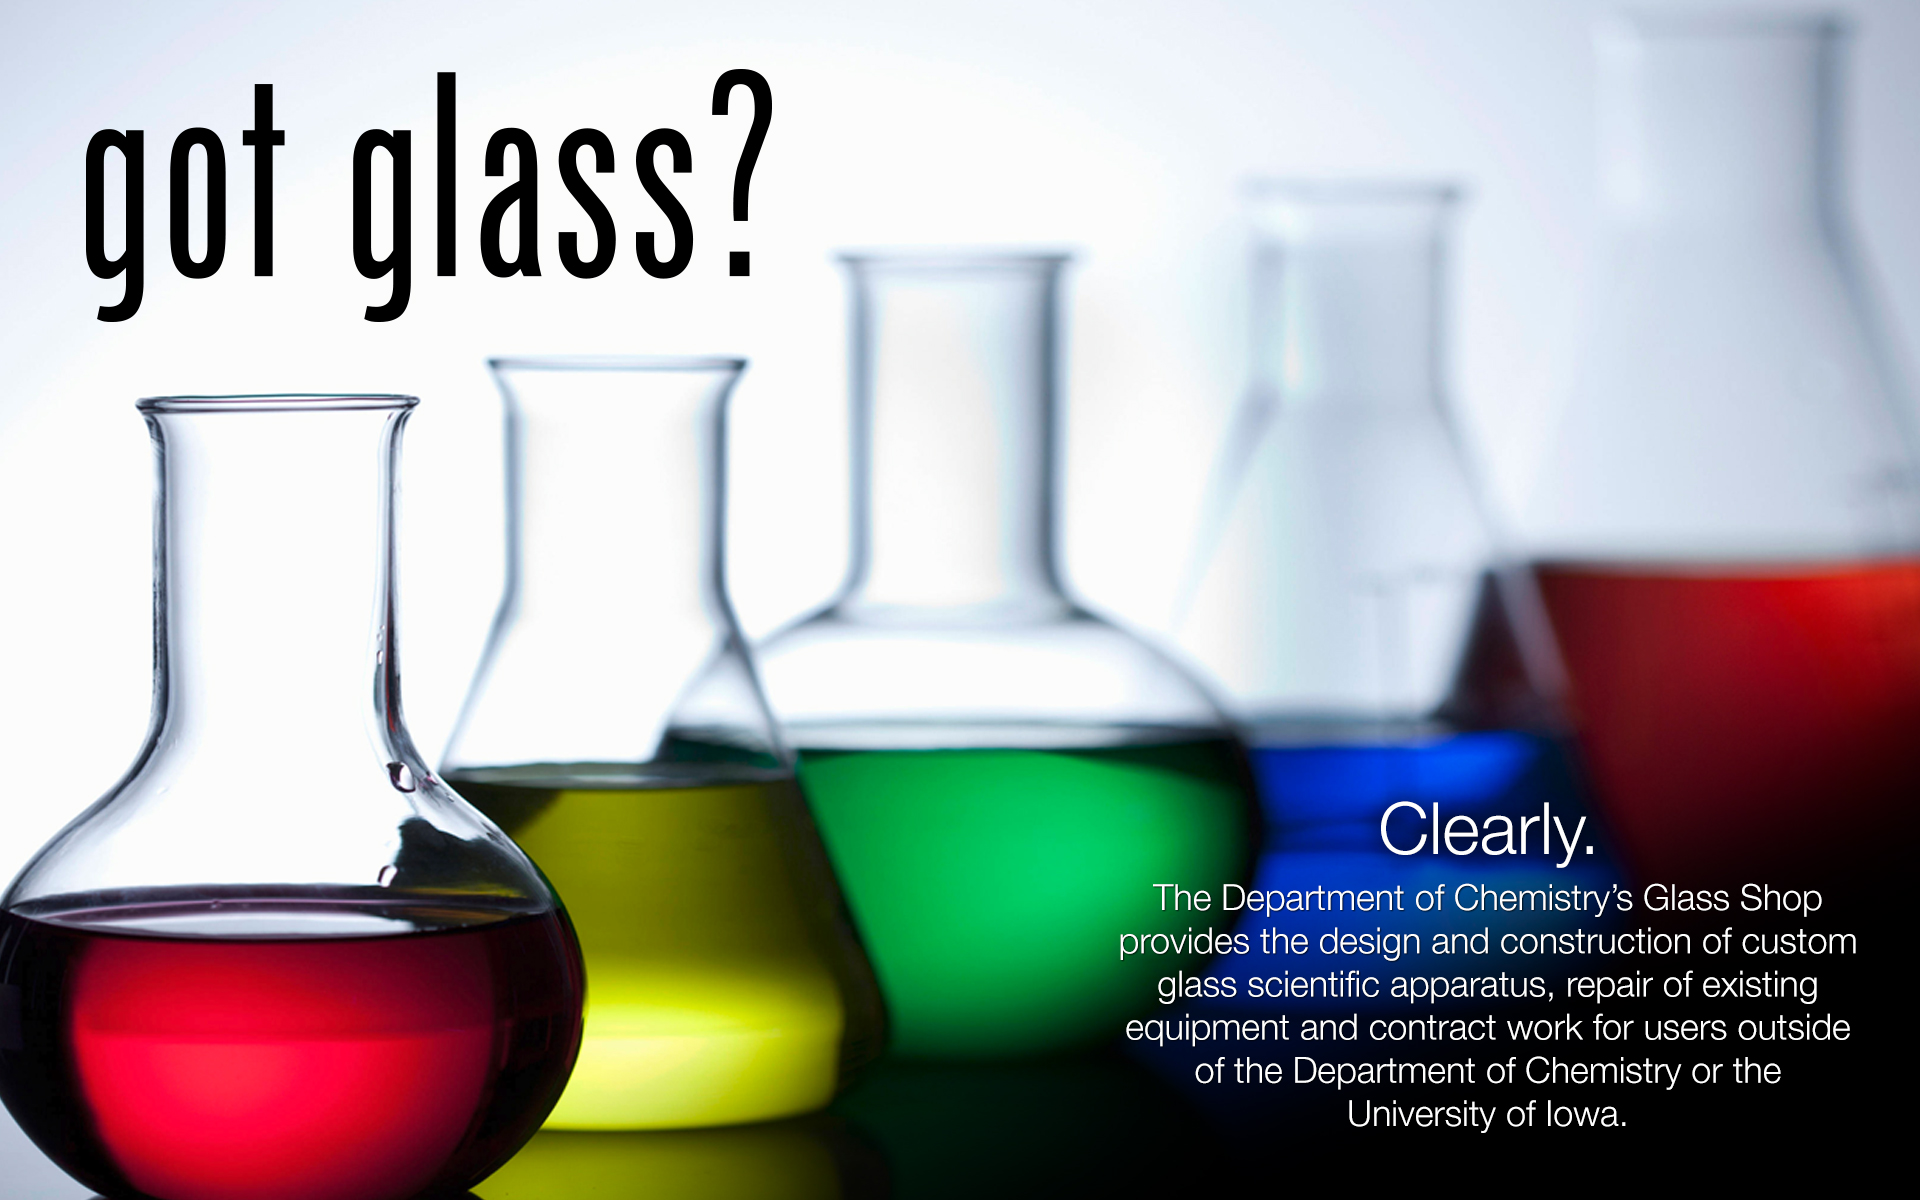 The Department of Chemistry’s Glass Shop provides the design and construction of custom glass scientific apparatus, repair of existing equipment and contract work for users outside of the Department of Chemistry or the University of Iowa.